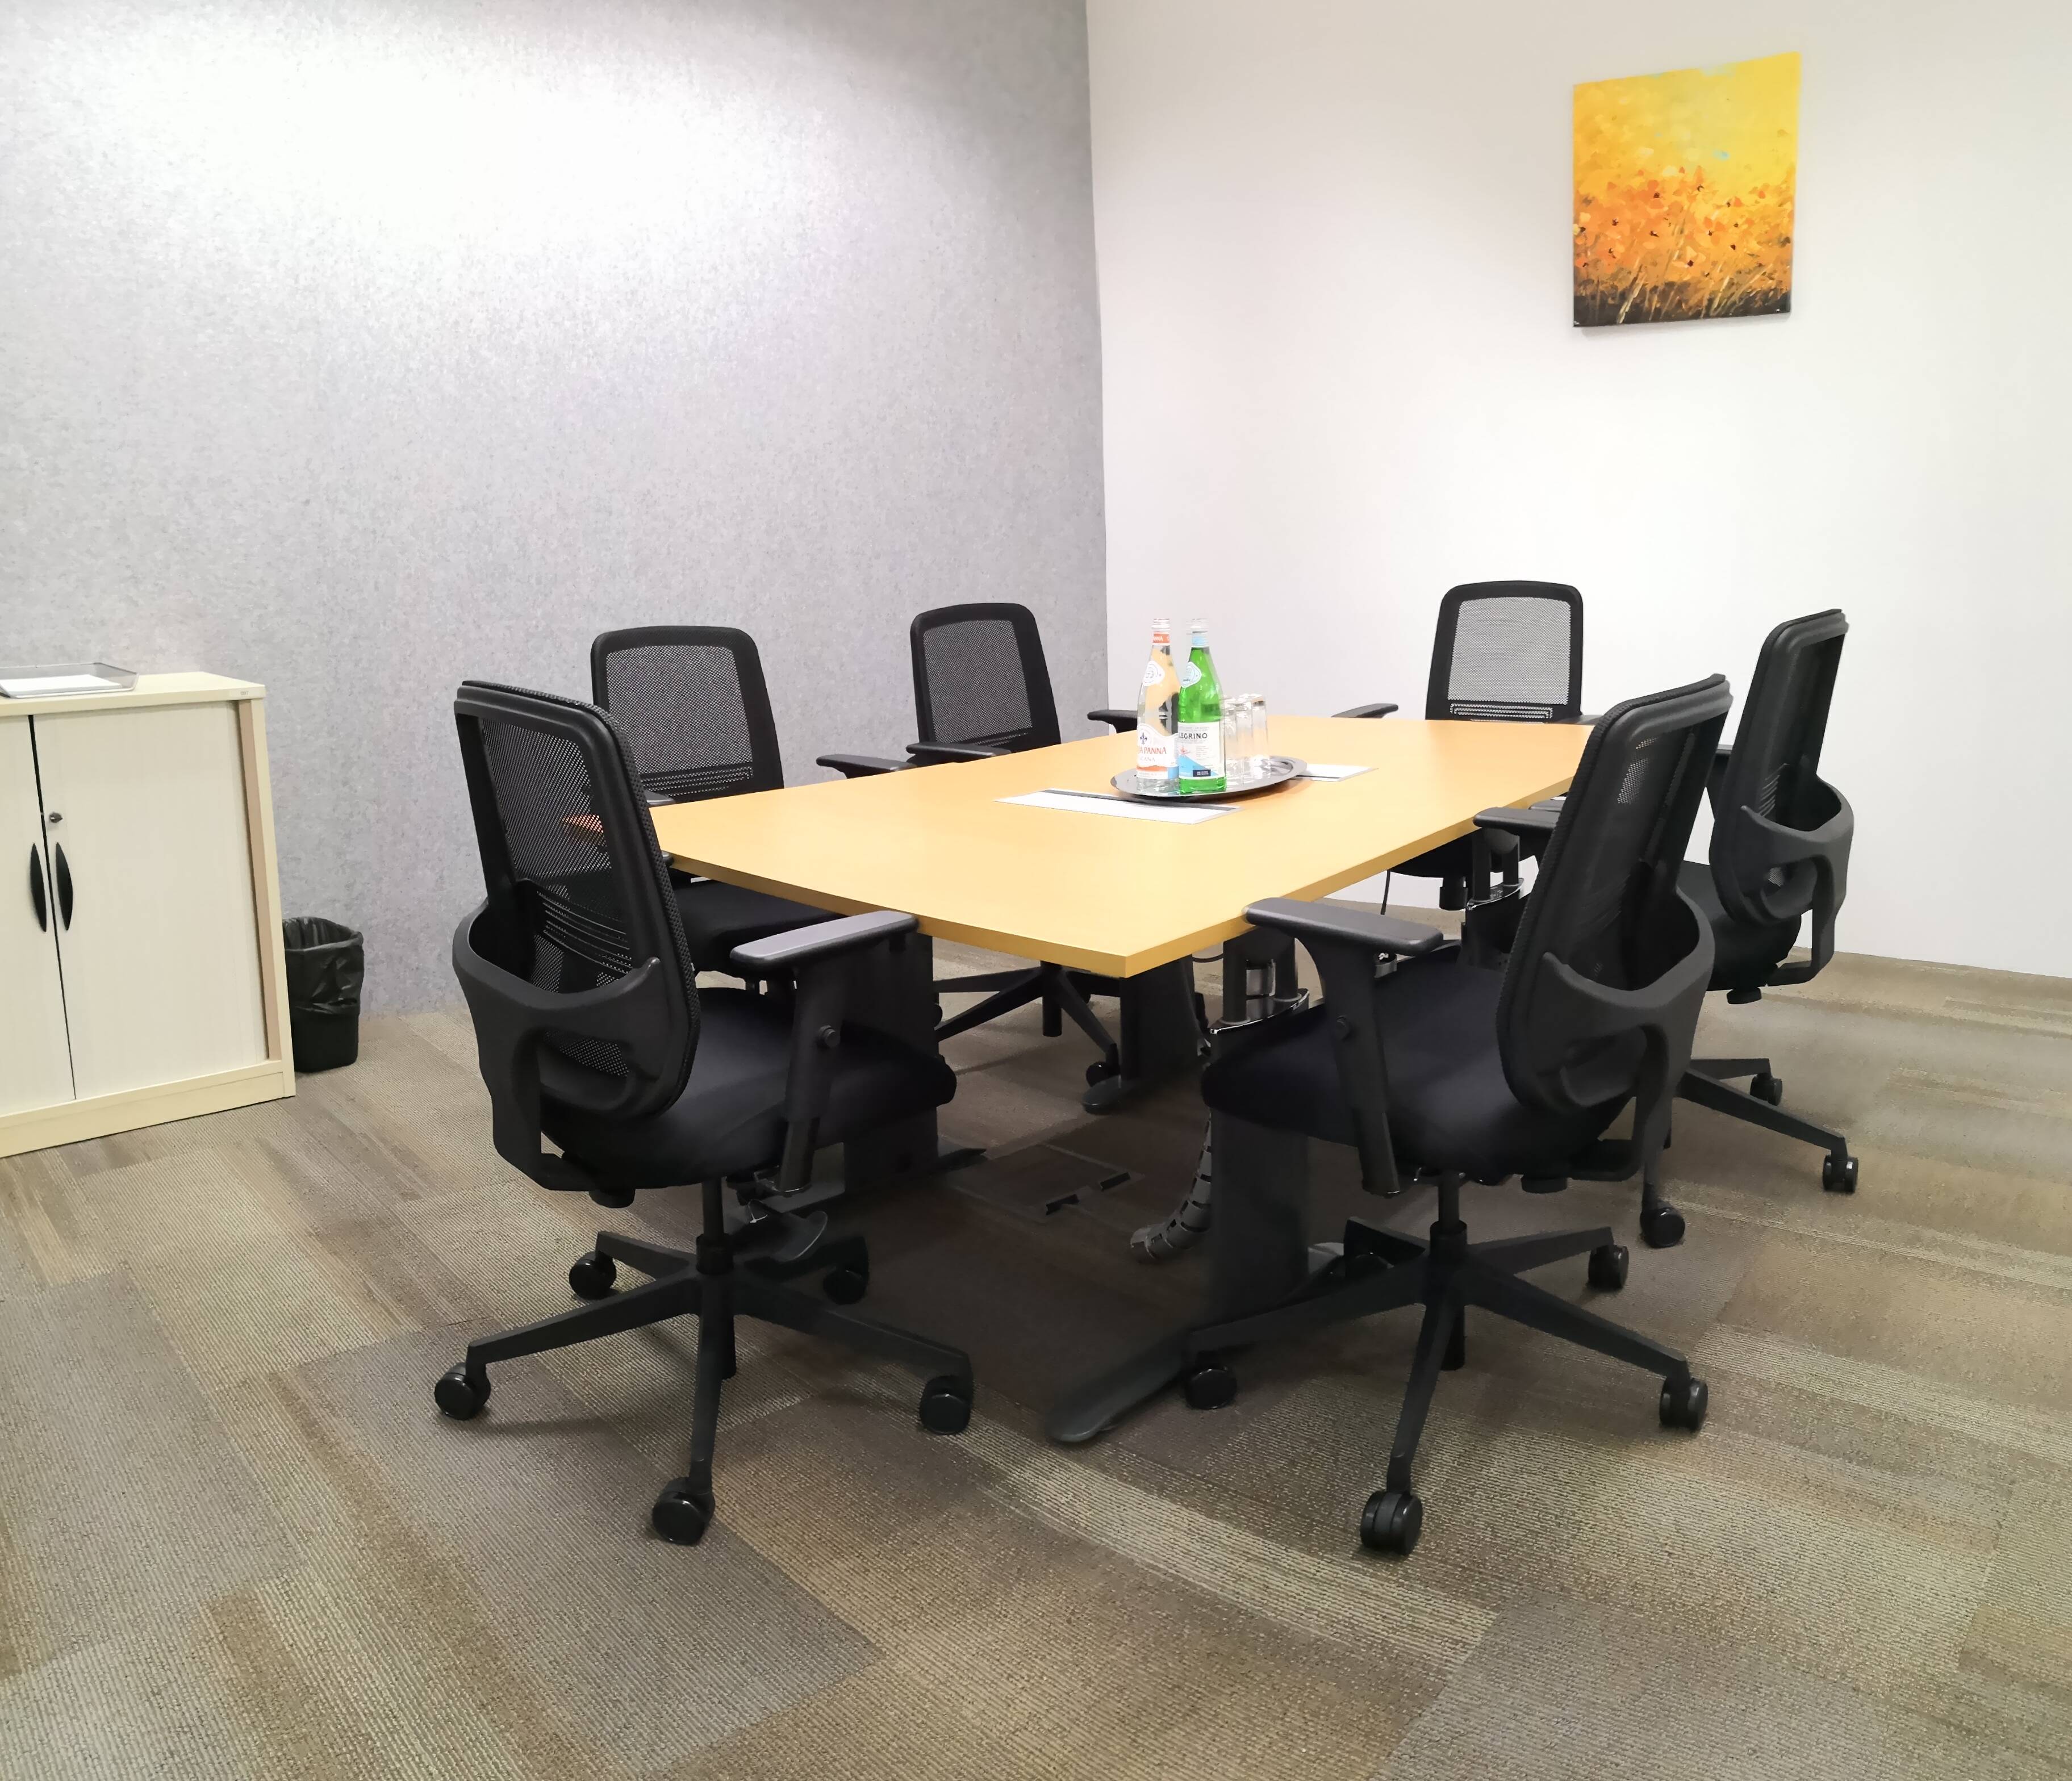 Collaborate Meeting Room for 6 pax